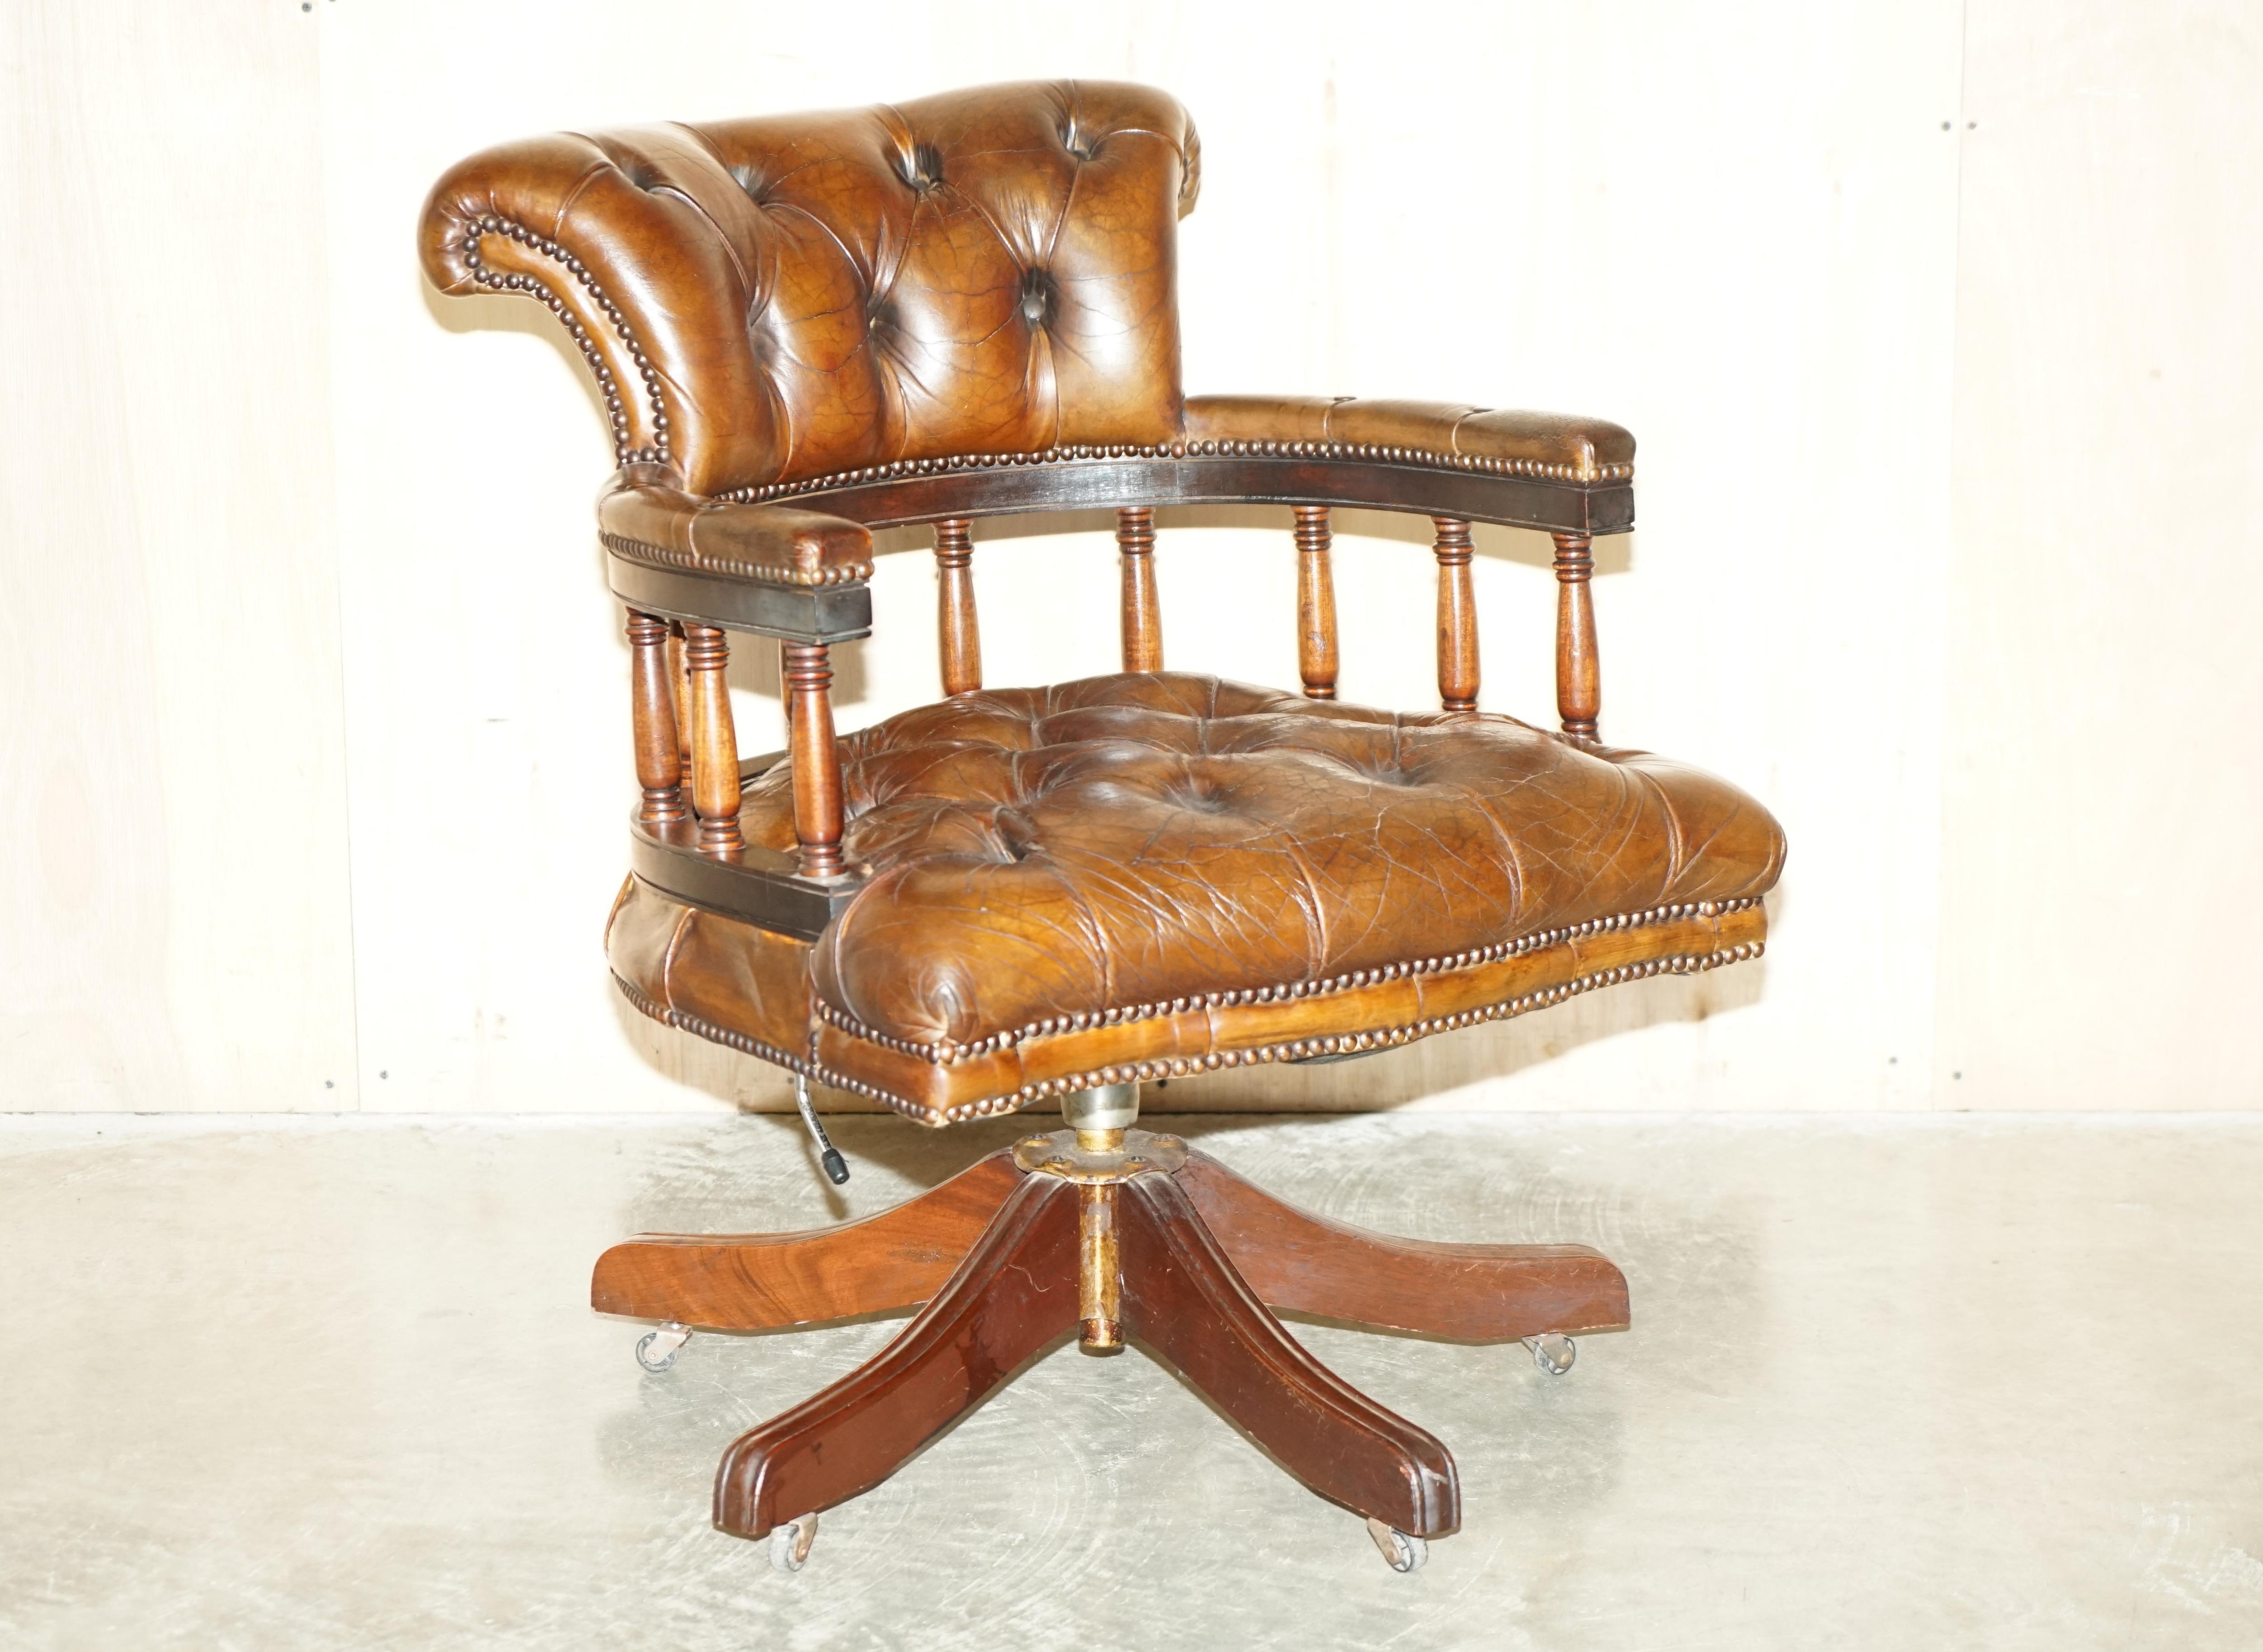 Royal House Antiques

Royal House Antiques is delighted to offer for sale this lovely lightly restored original oak framed vintage hand dyed Chesterfield cigar brown leather directors chair.

Please note the delivery fee listed is just a guide, it